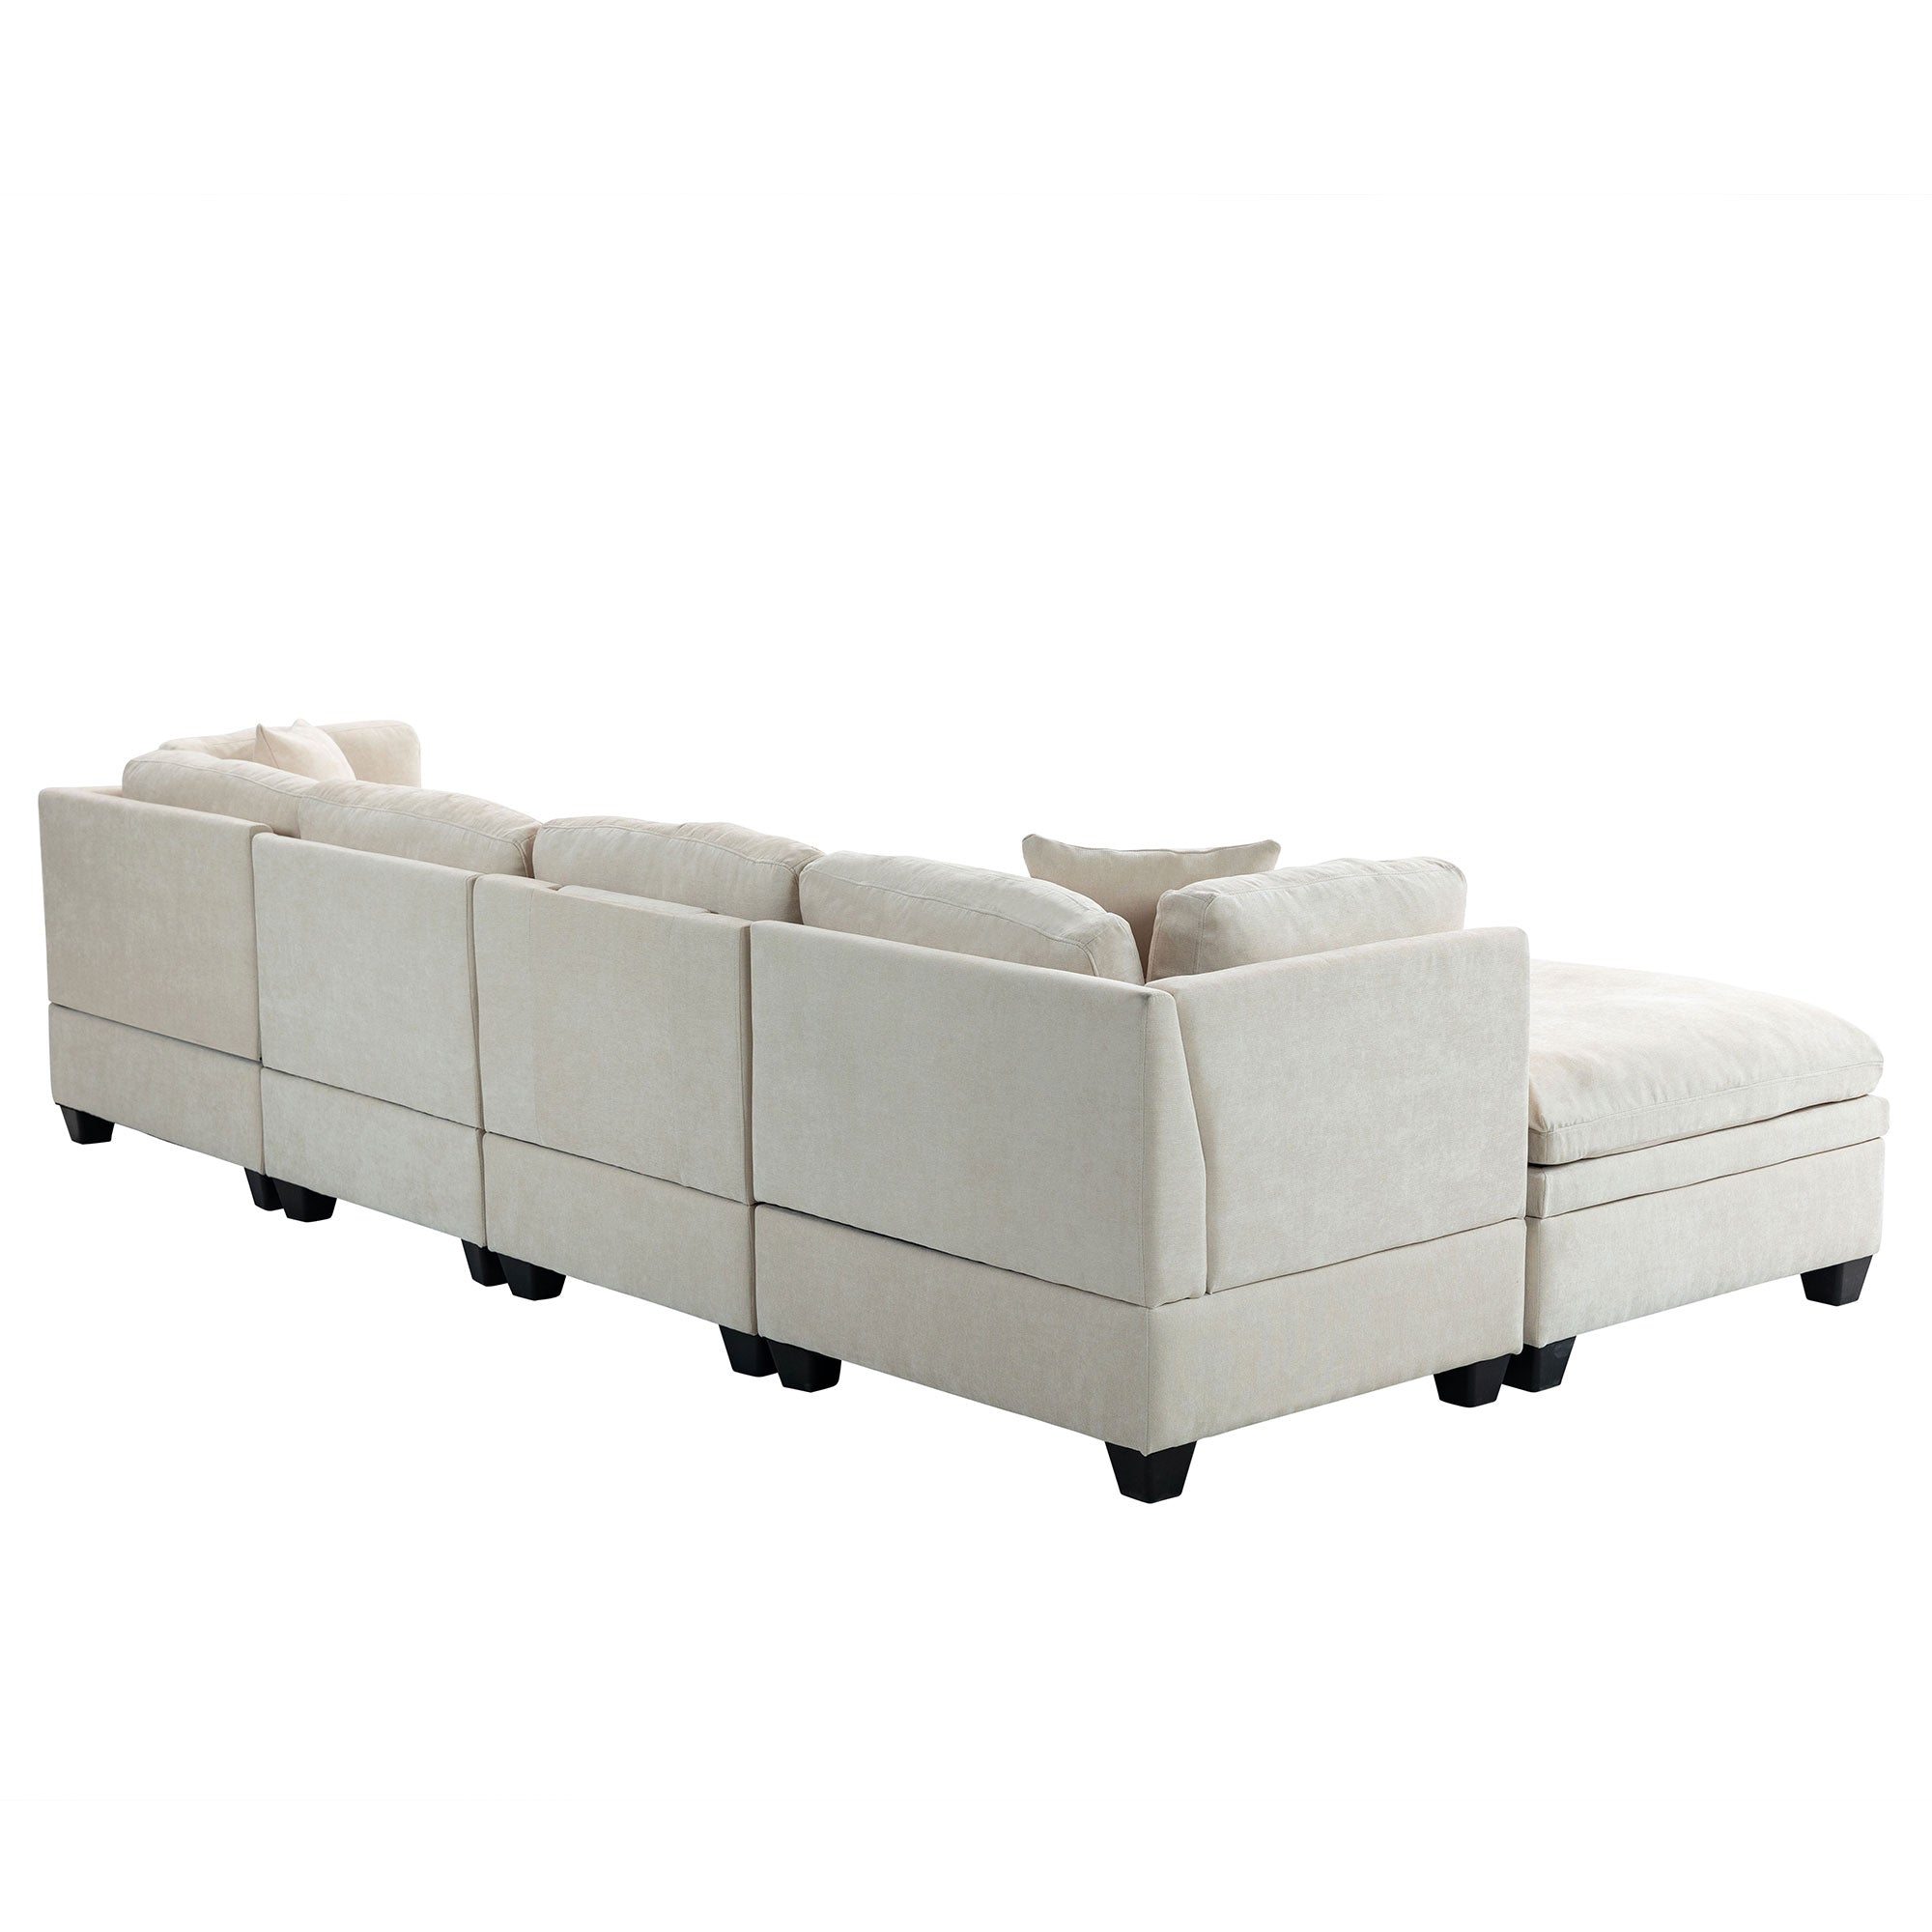 Bellemave 128.7" Upholstered Modular Sofa with Removable Storage Ottoman and 2 hidden cup holders